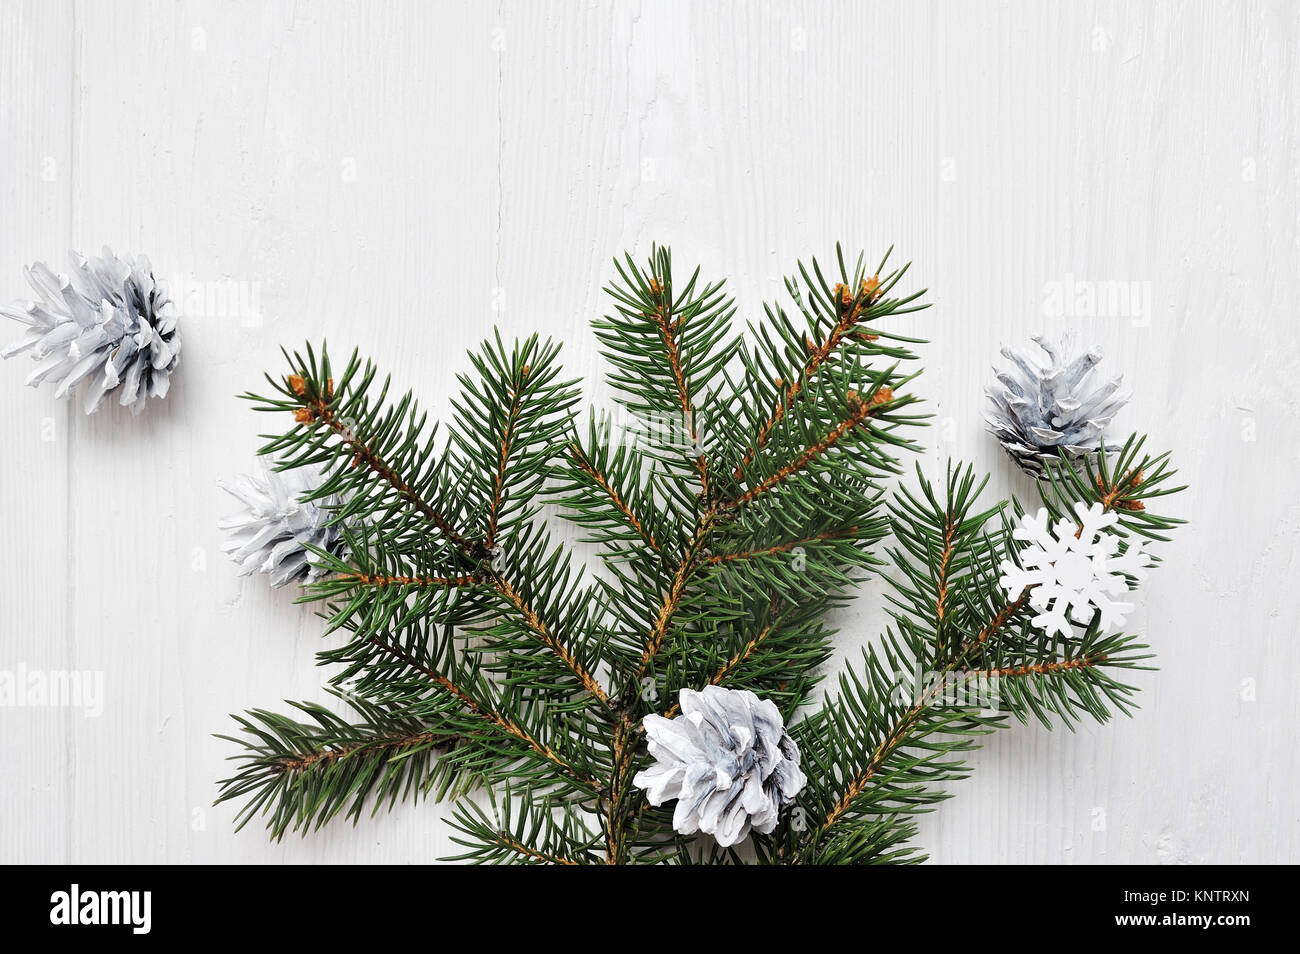 Mockup Christmas tree branch flatlay on a white wooden background, with place for your text Stock Photo